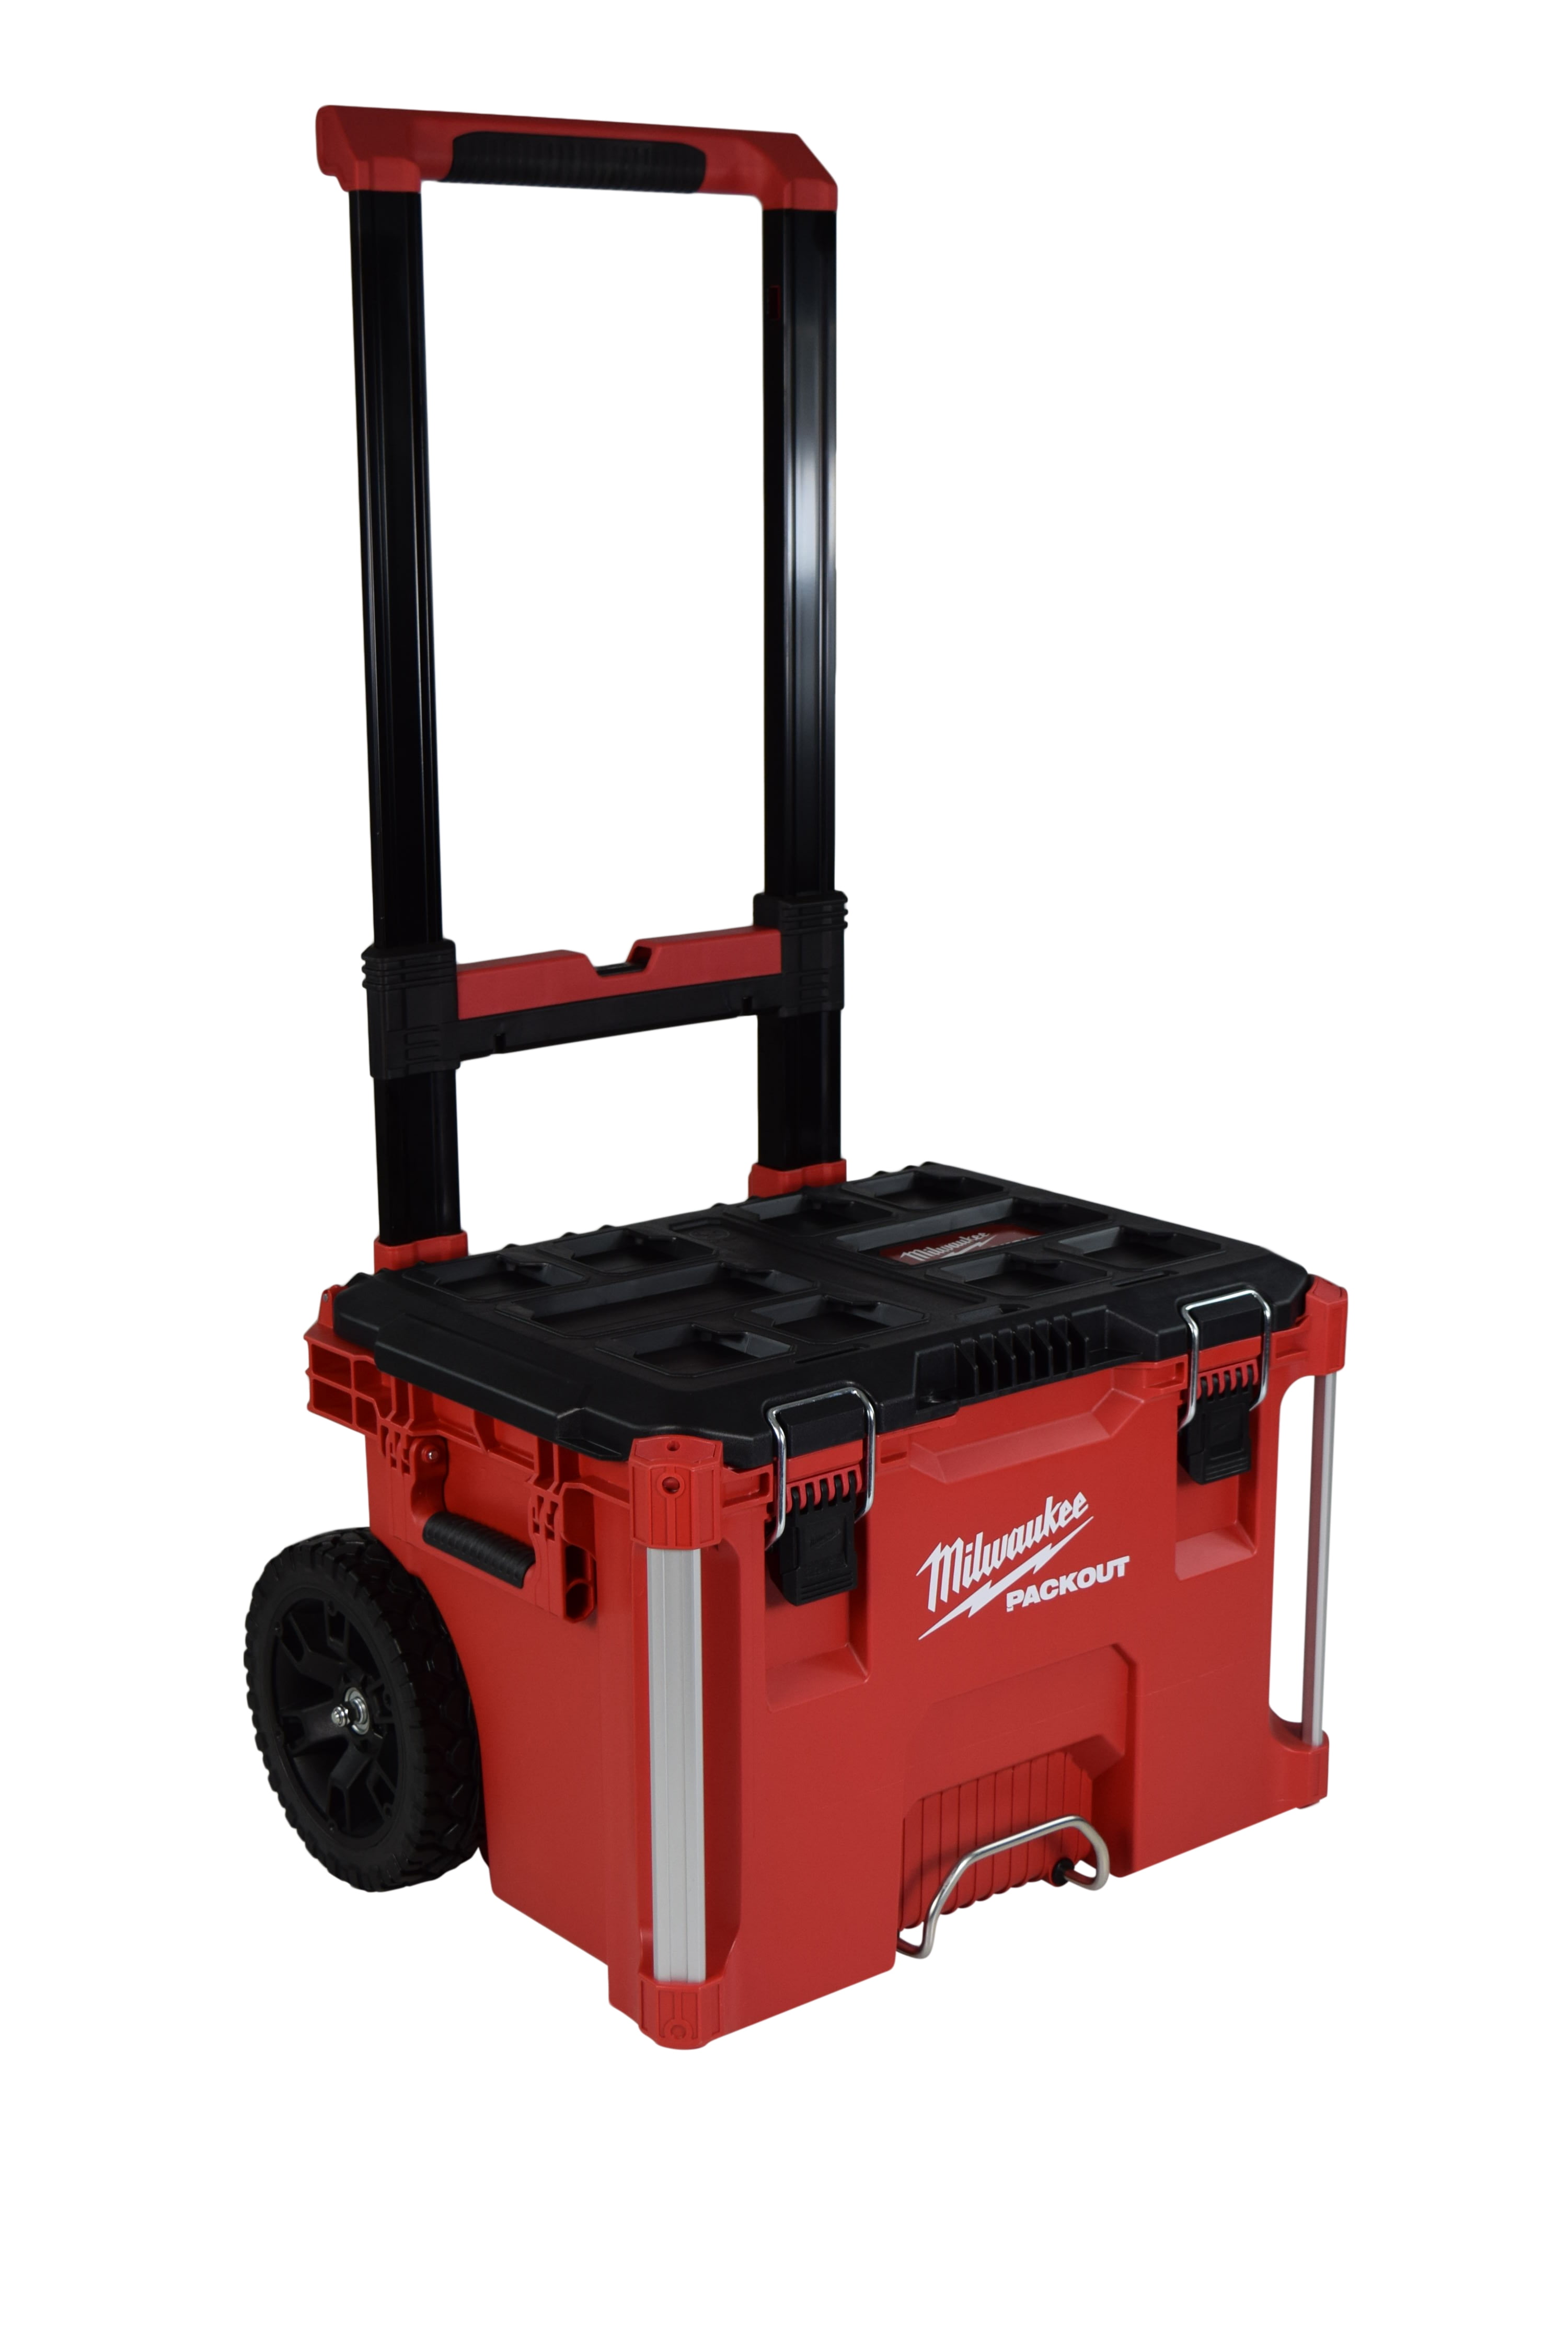 adaptability-the-other-day-motion-milwaukee-packout-tool-box-48-22-fit